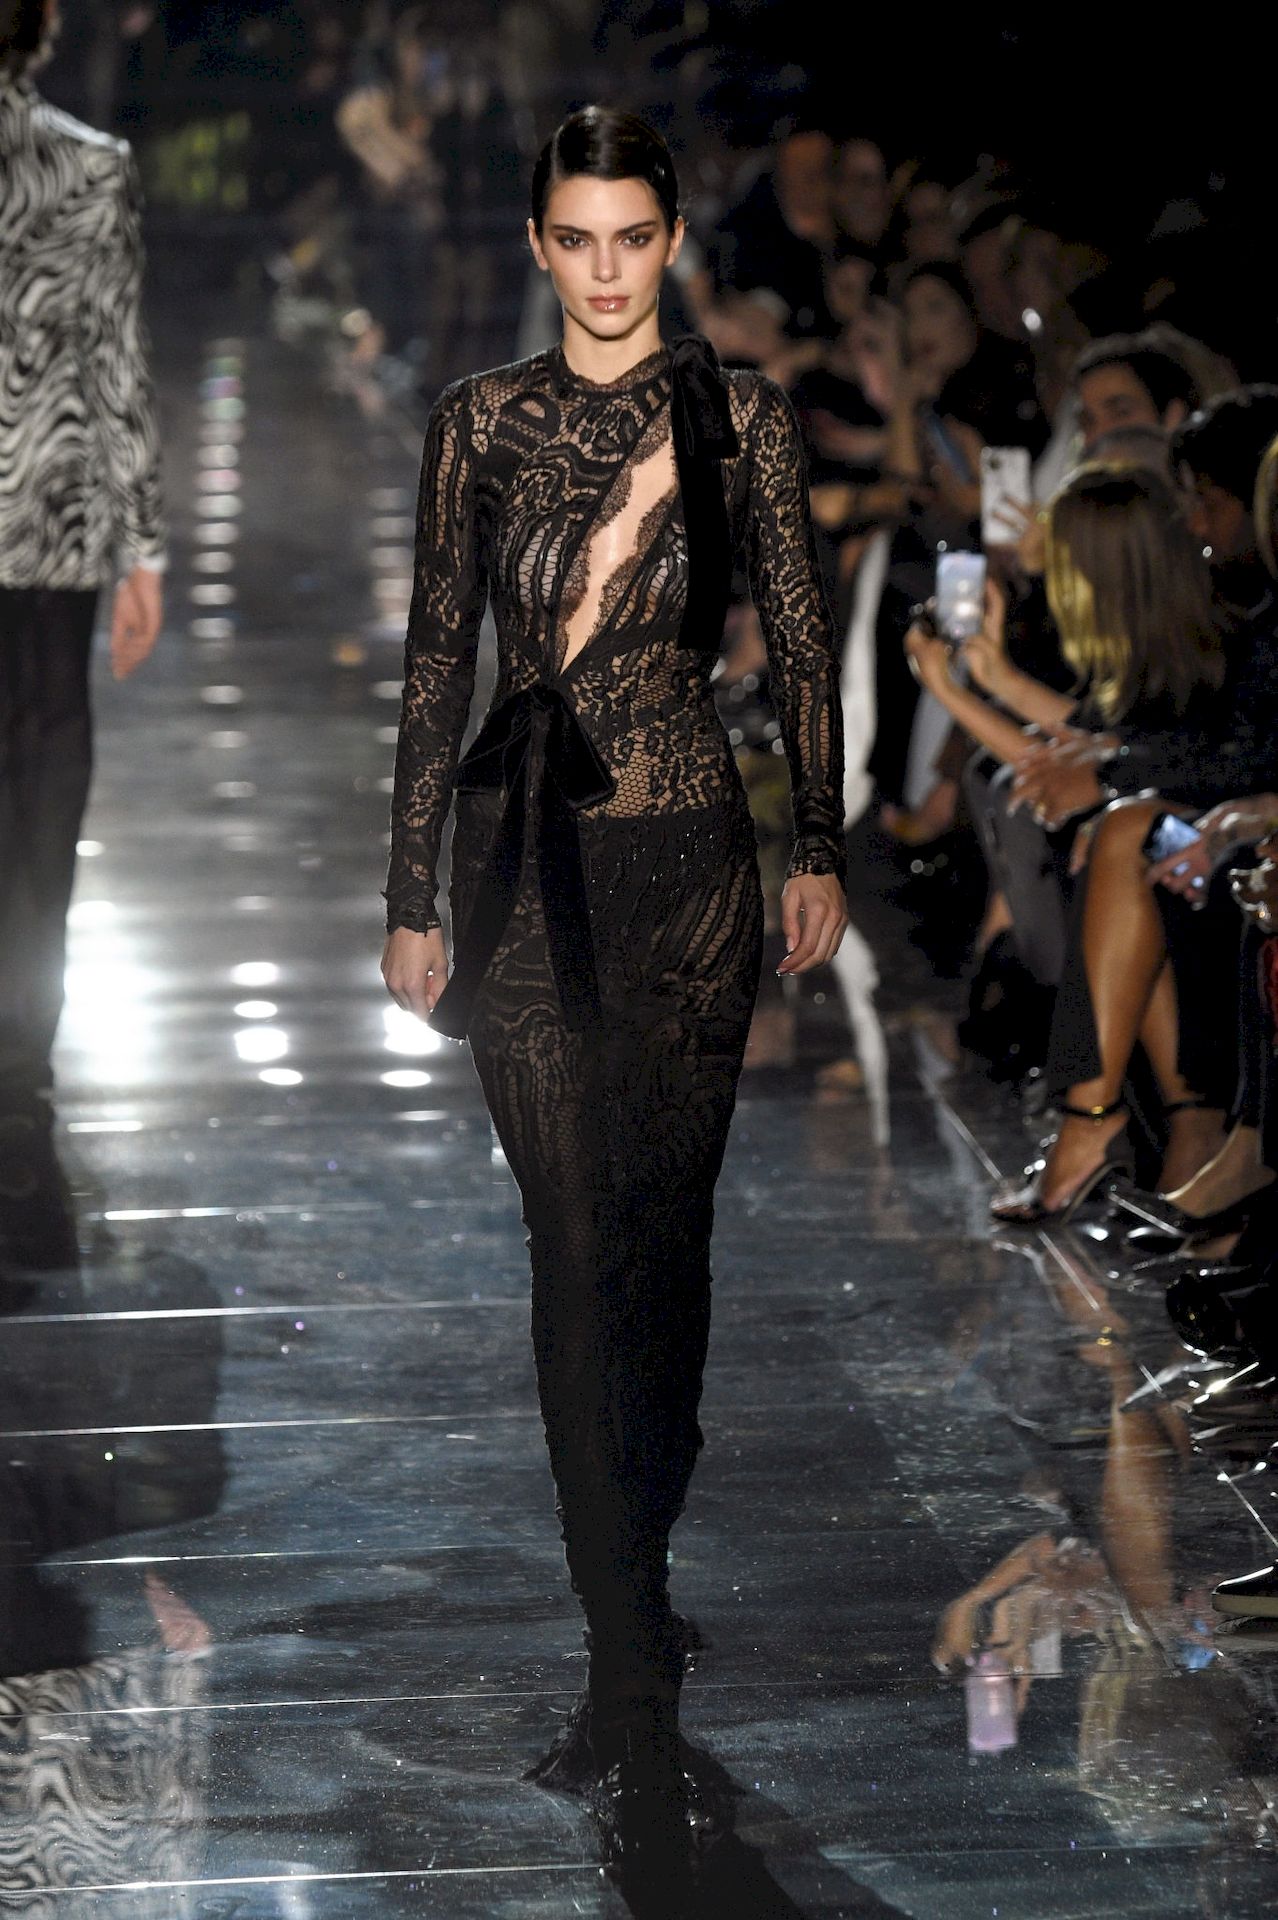 Kendall-Jenner-Walks-the-Runway-During-the-Tom-Ford-Show-0010.jpg